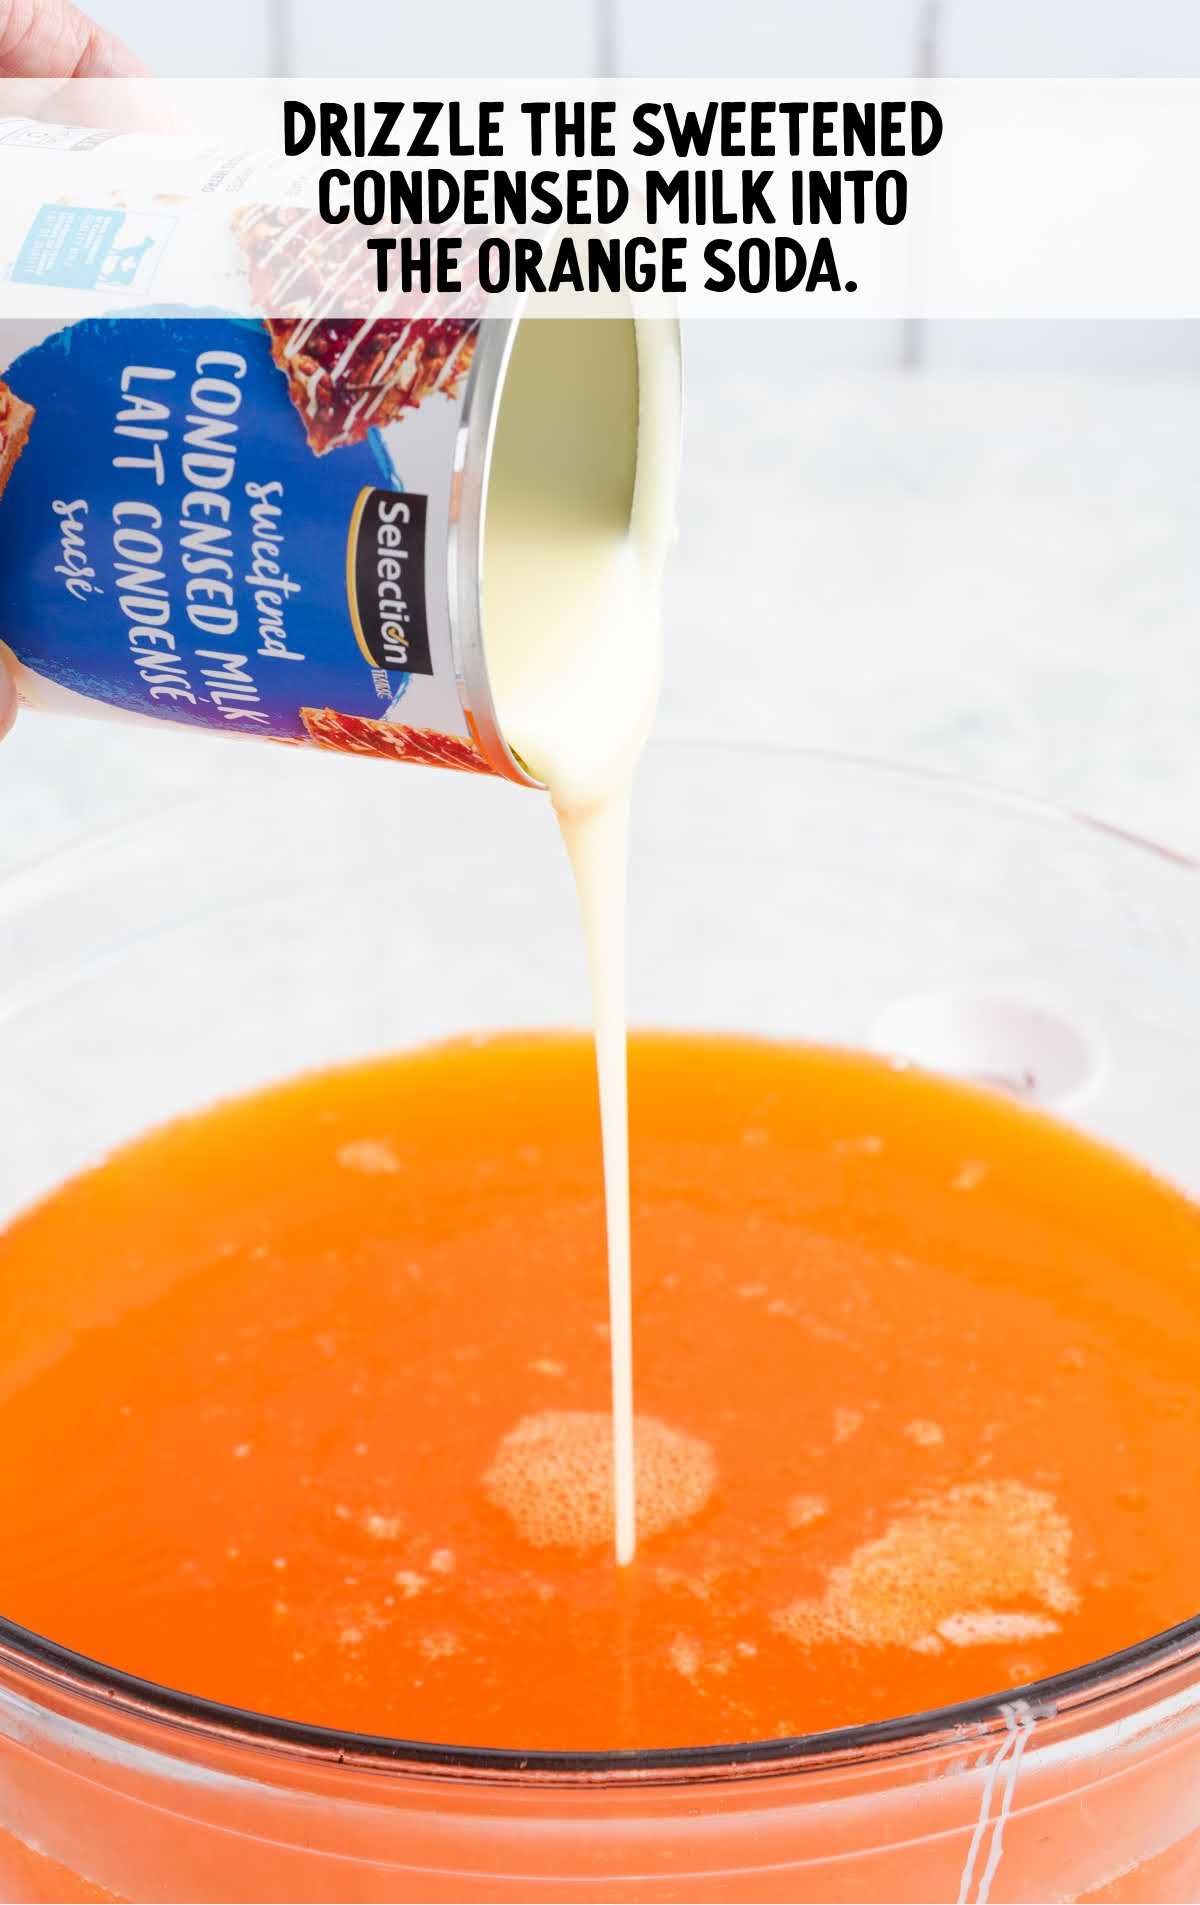 sweetened condensed milk drizzled into the orange soda in a bowl